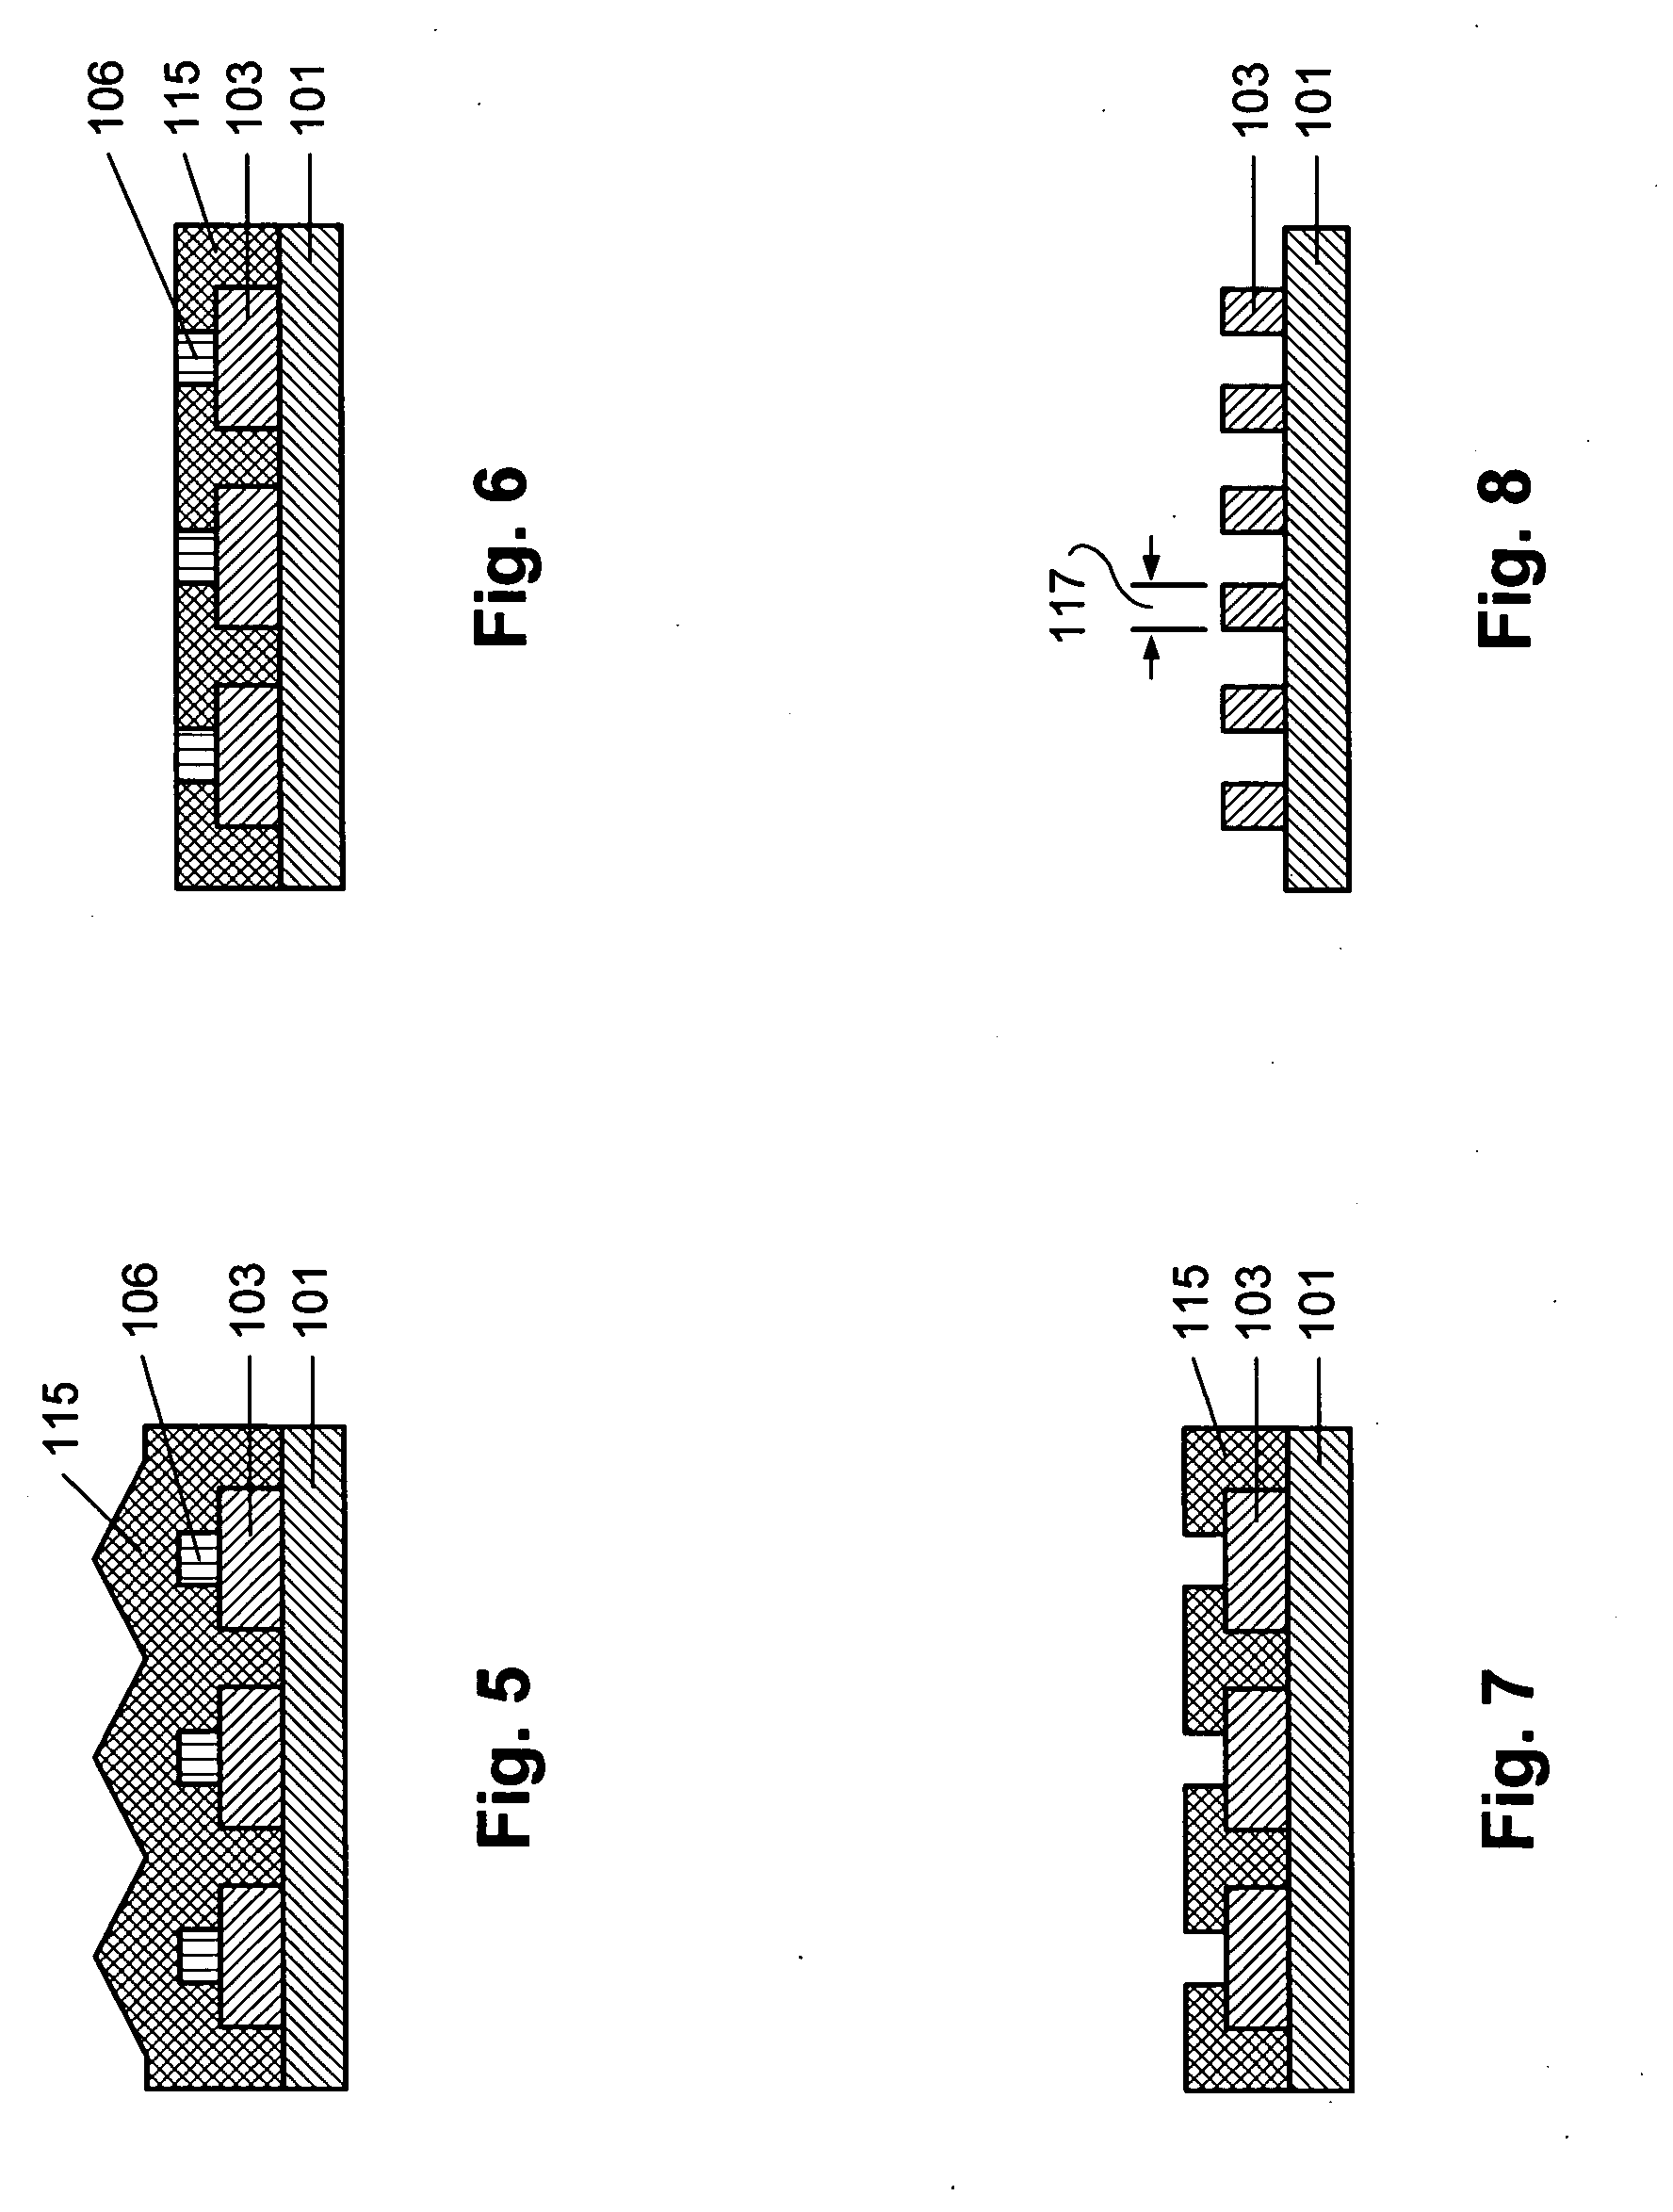 Method of pitch dimension shrinkage